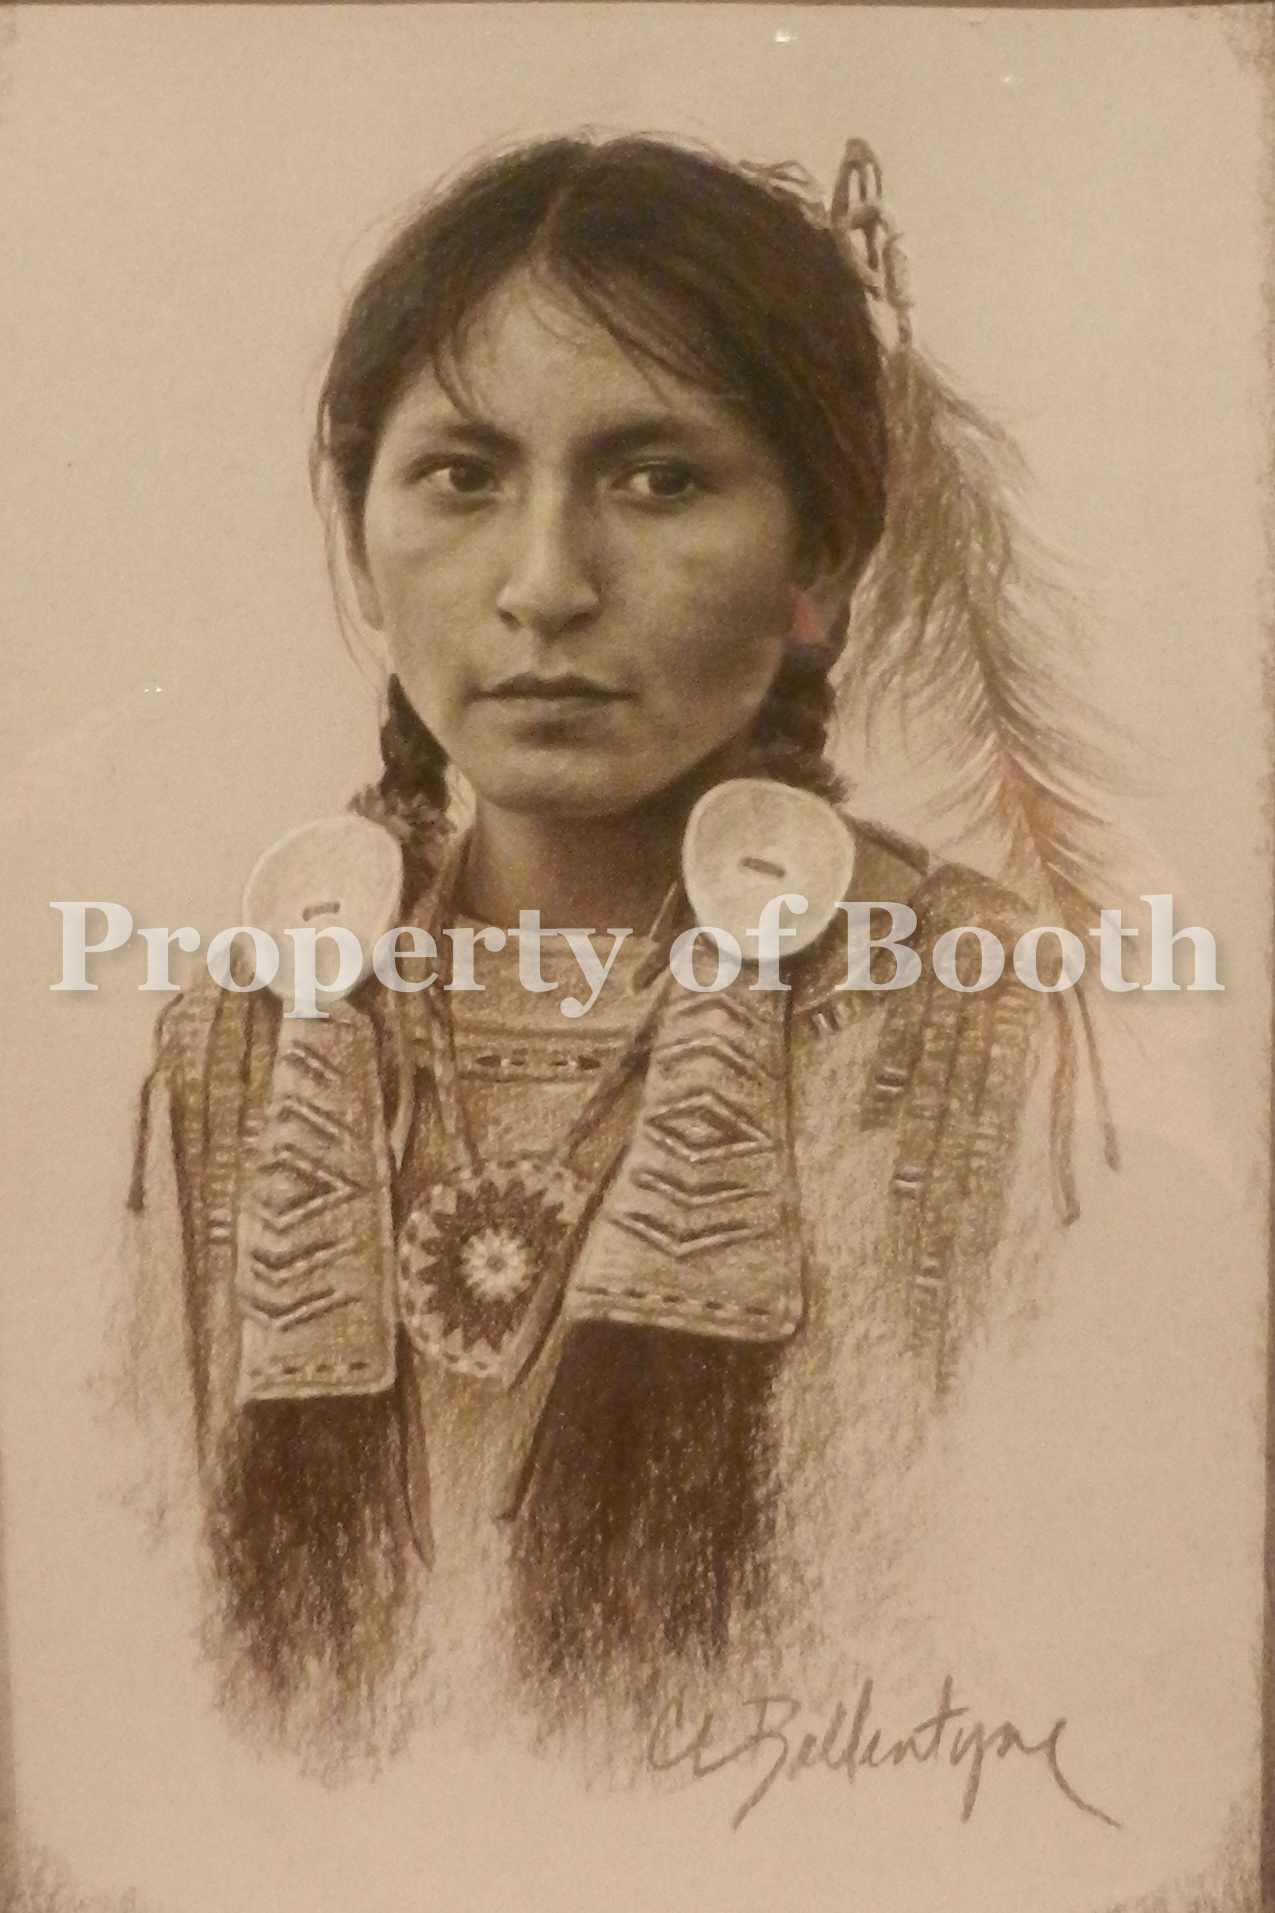 © Carrie L. Ballantyne, Untitled (Portrait of Indian Girl), n.d., pencil on paper, 12 x 8" 